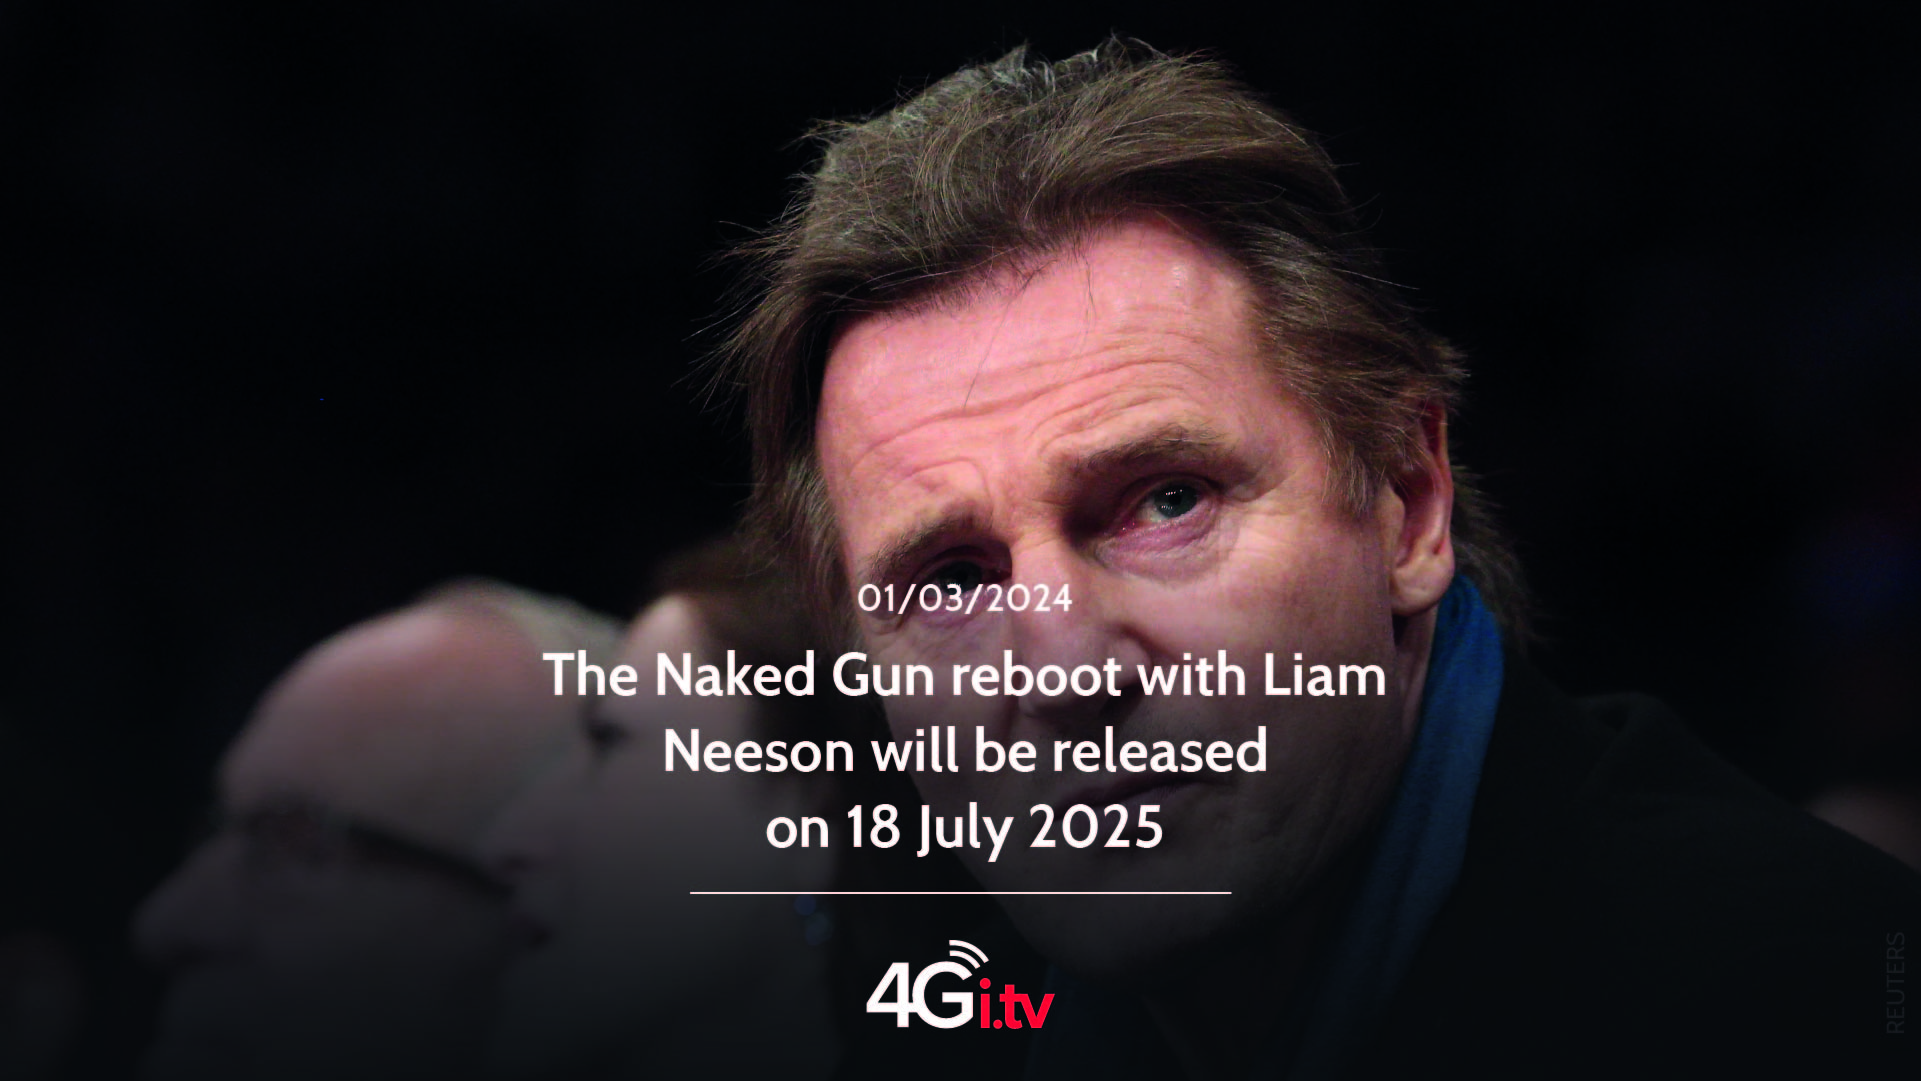 Подробнее о статье The Naked Gun reboot with Liam Neeson will be released on 18 July 2025